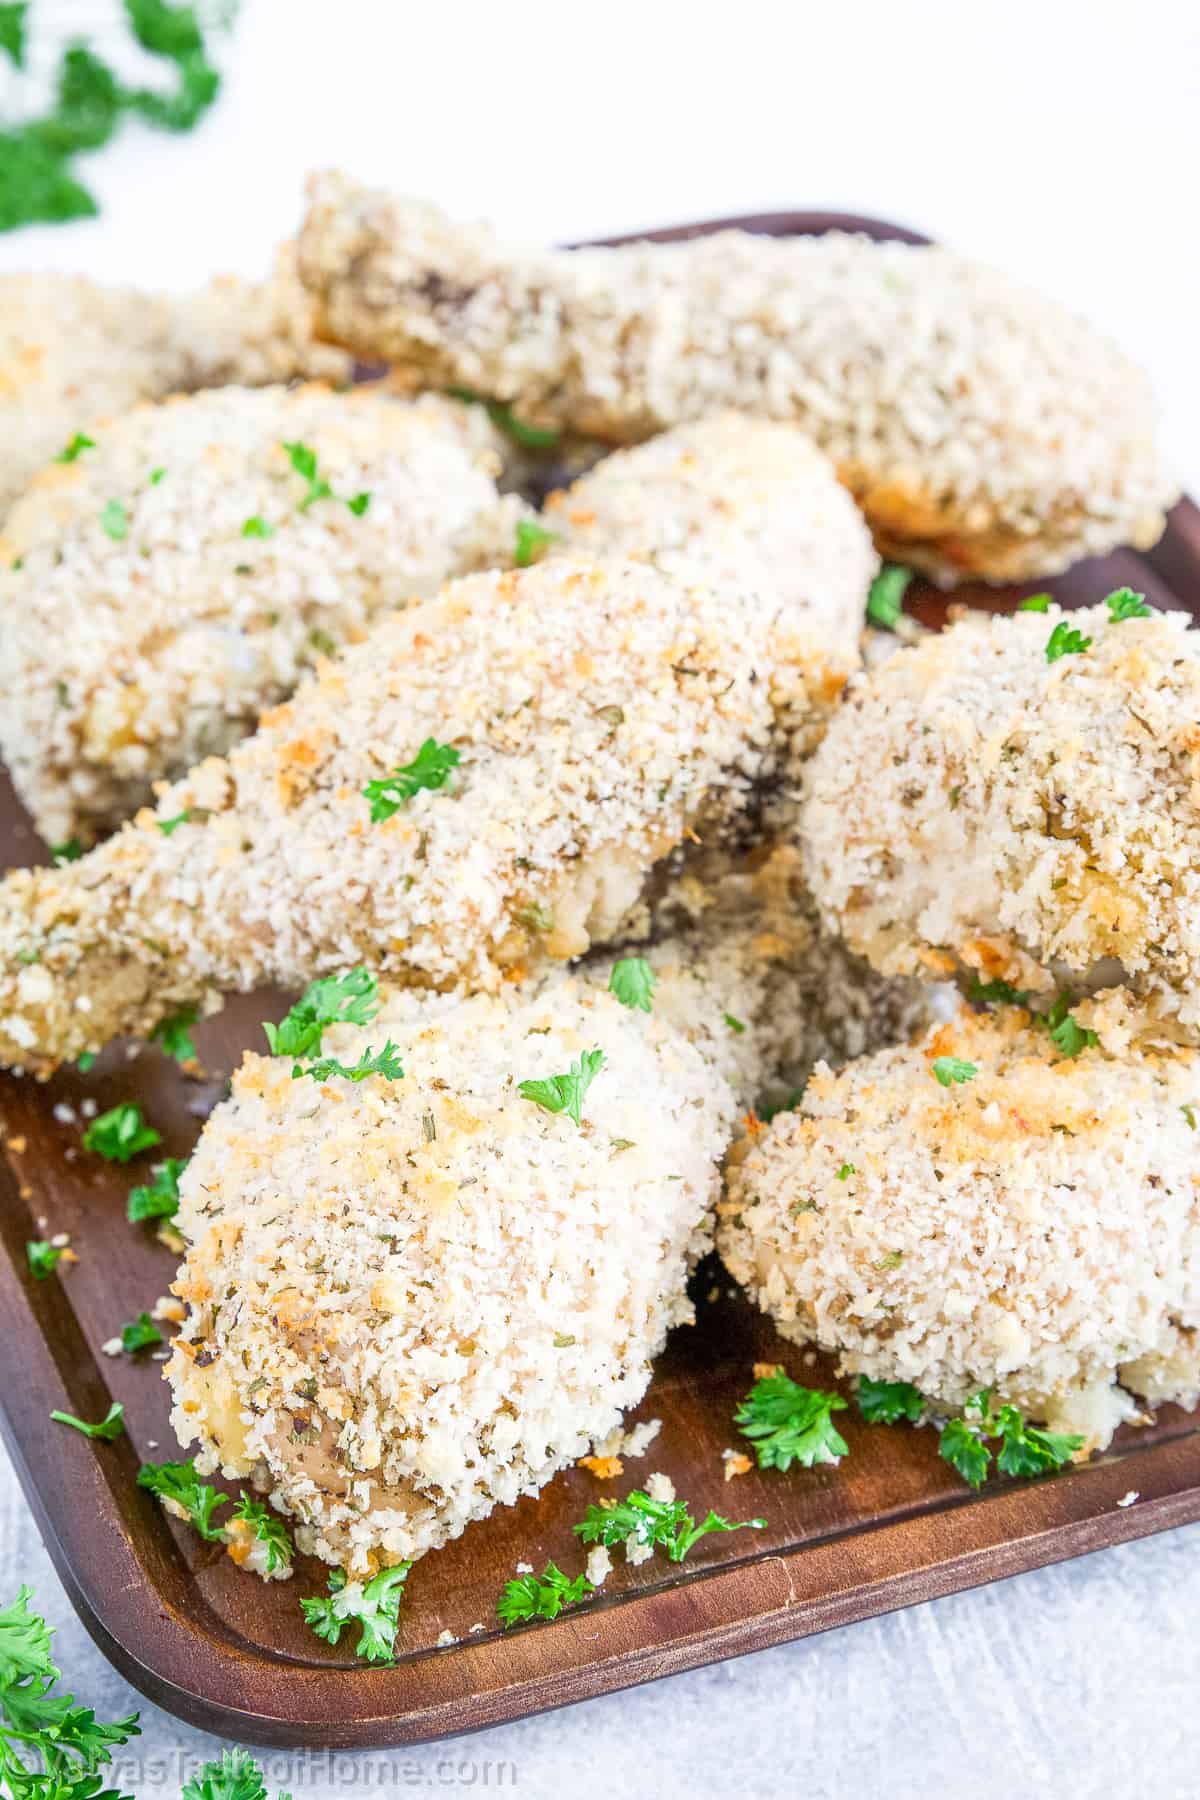 f you're looking for a meal that's a guaranteed hit with the kids and easy to prep ahead, this baked breaded chicken drumsticks recipe is your answer. 